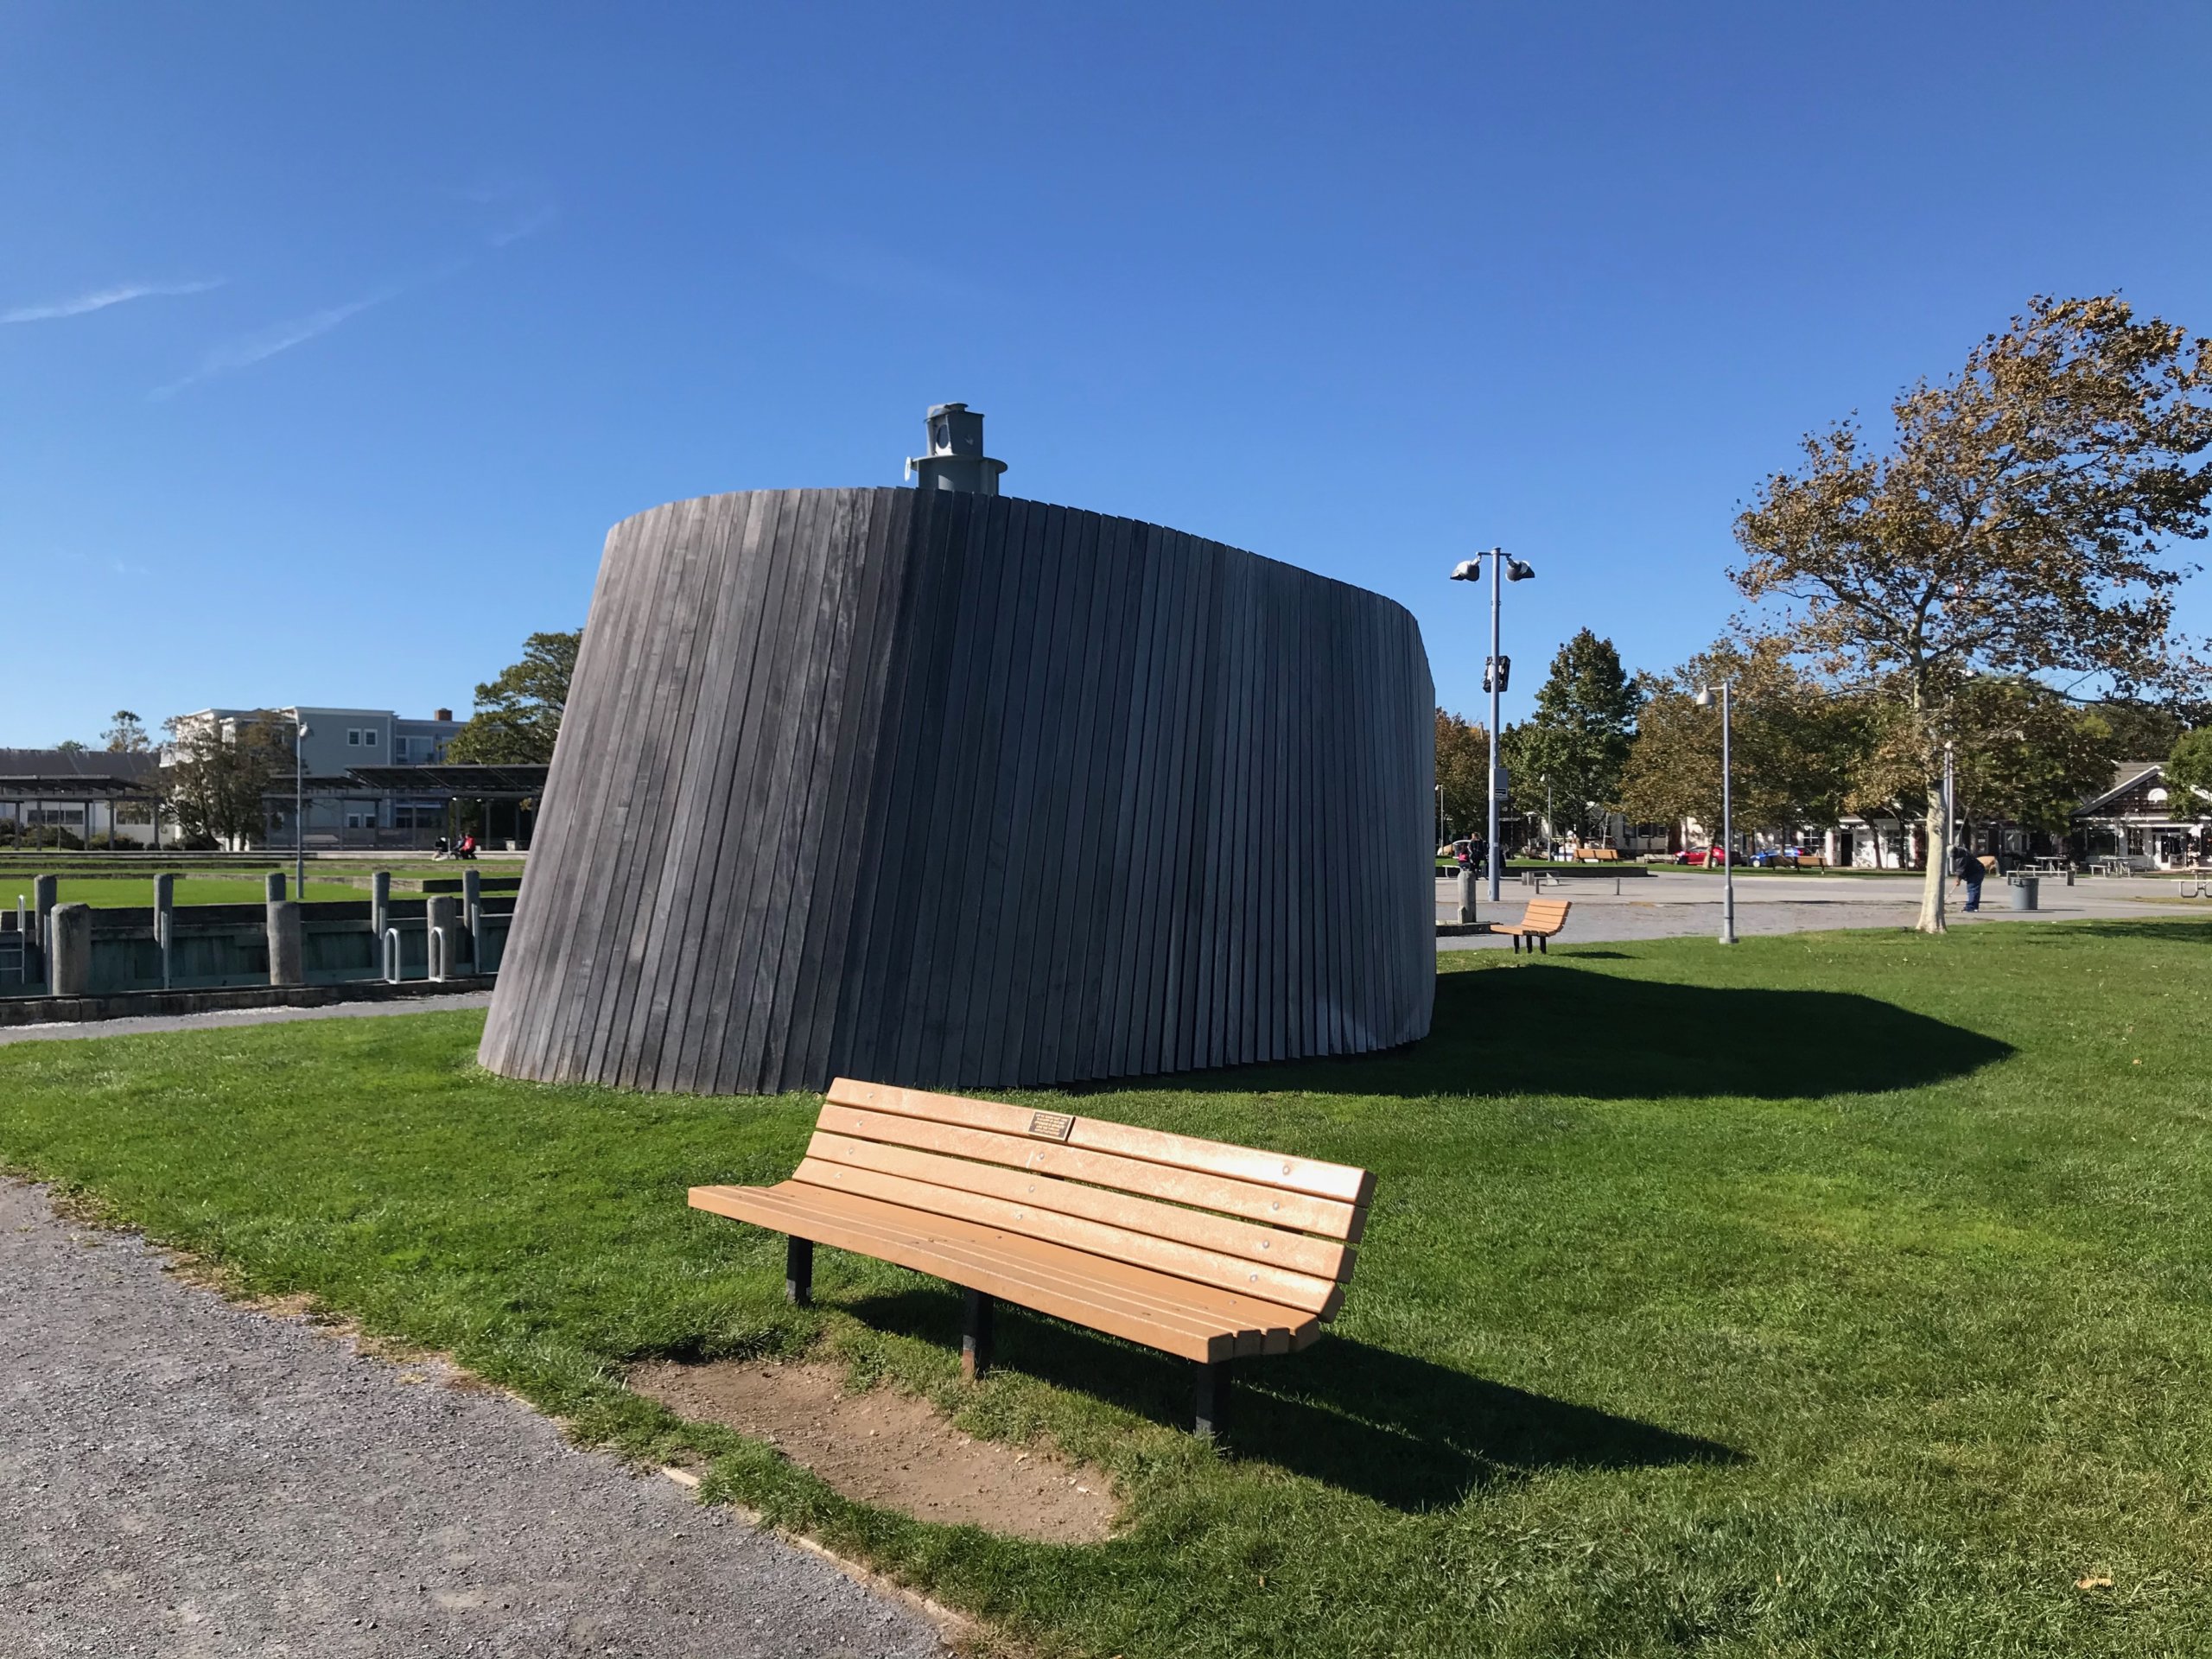 Camera Obscura at Mitchell Park in Greenport